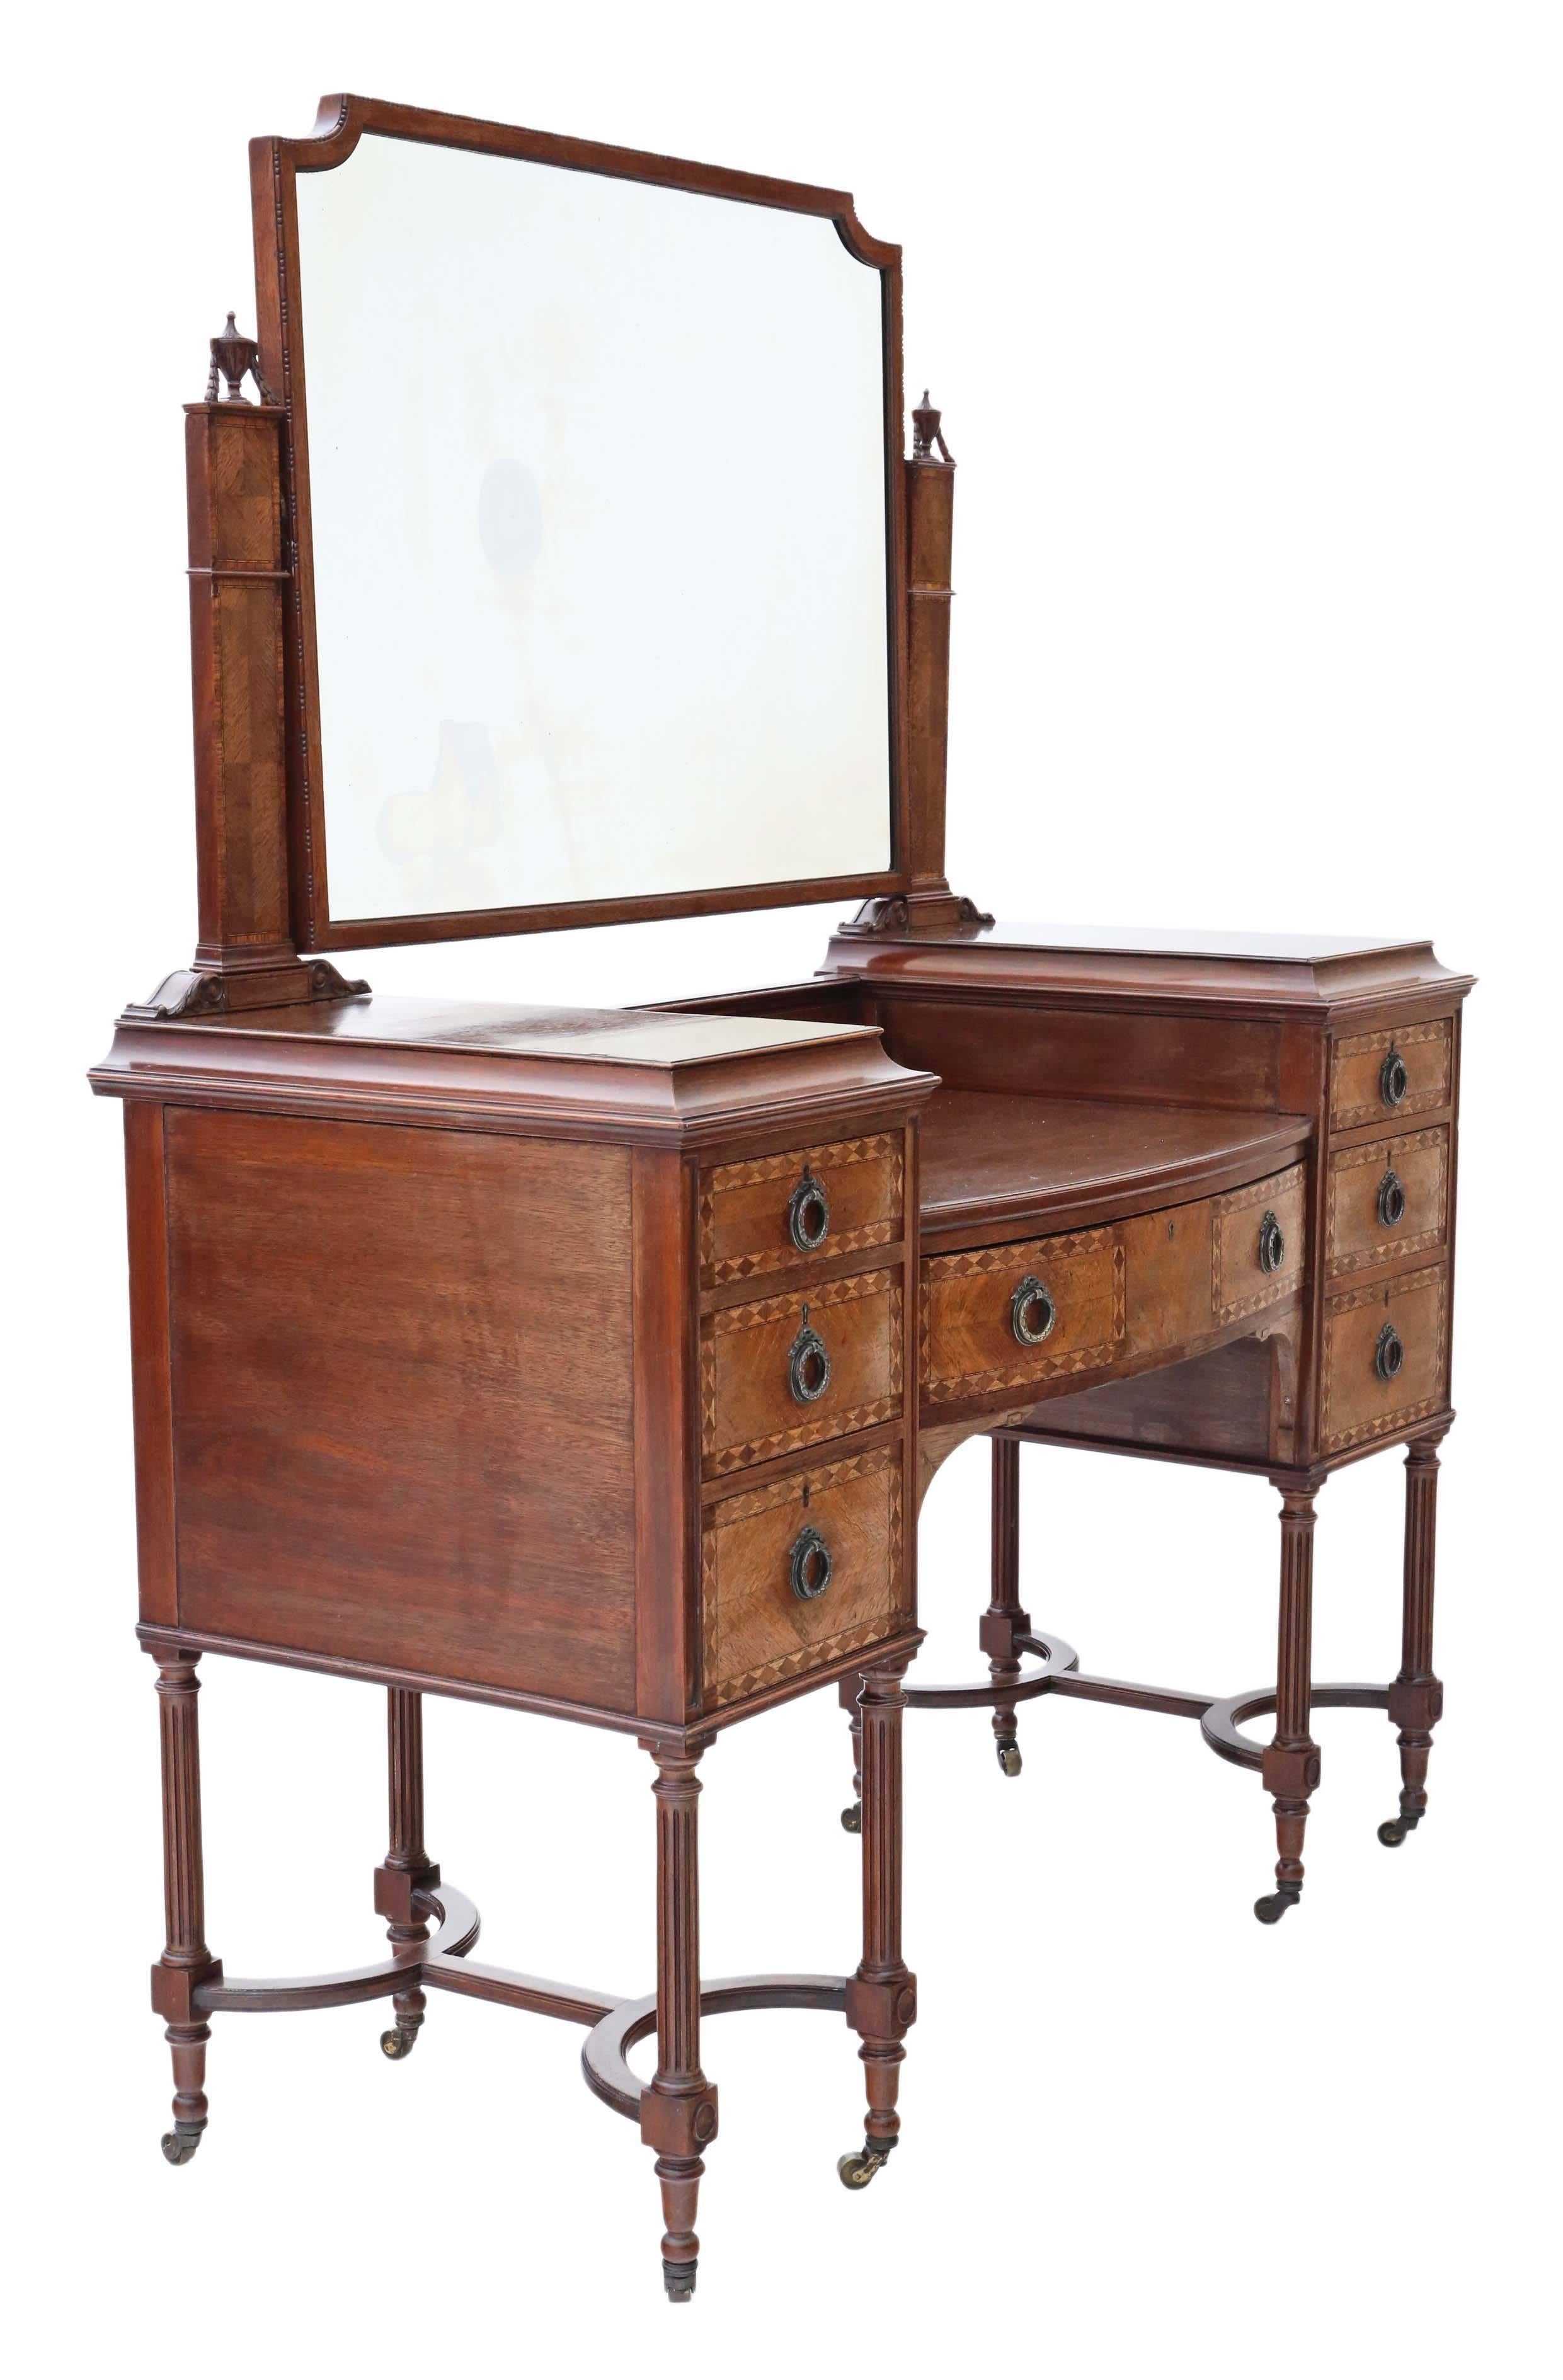 Antique Quality Edwardian circa 1900-1910 Inlaid Rosewood Dressing Table For Sale 3